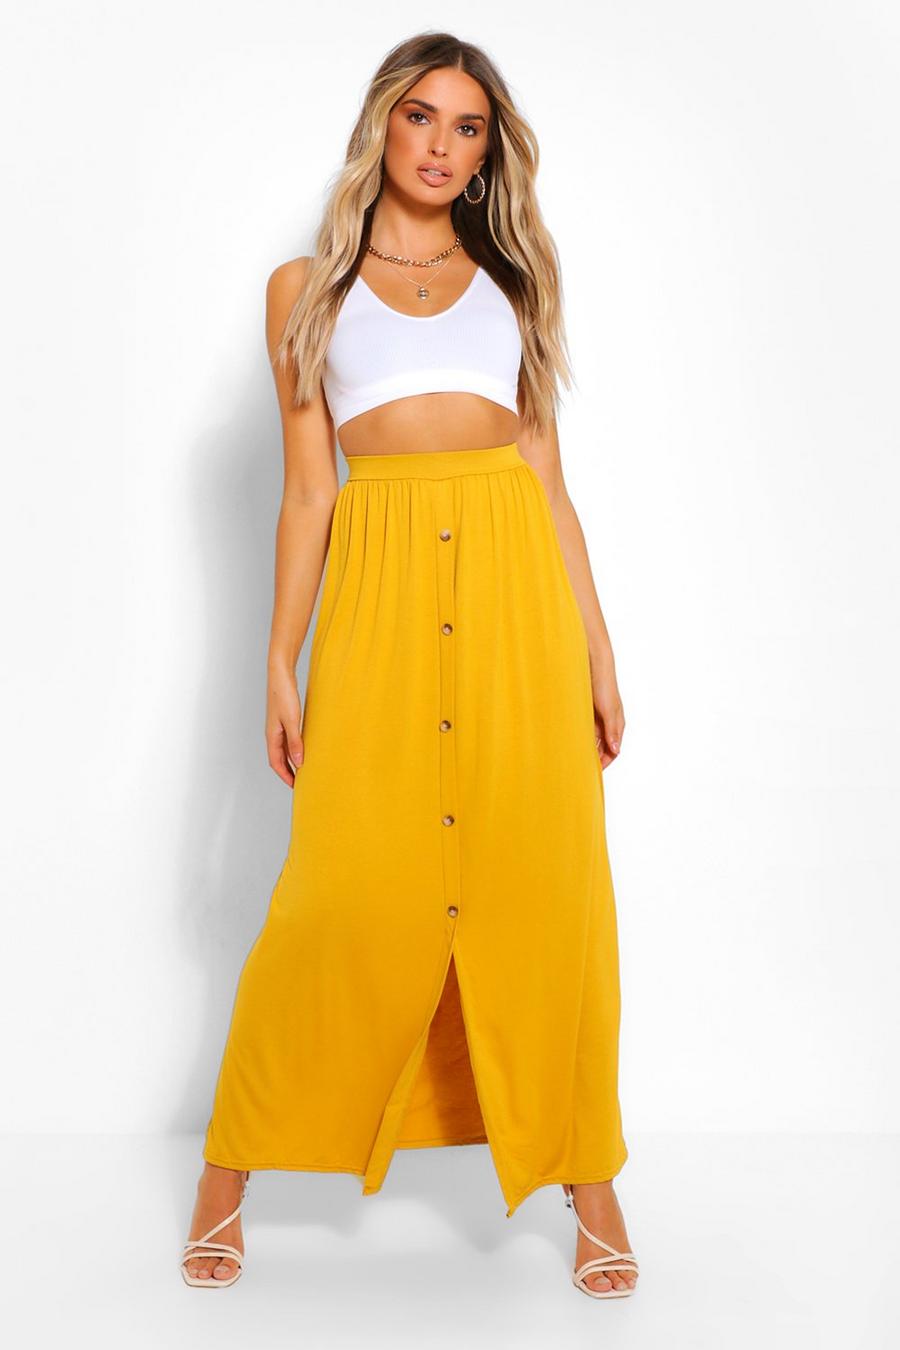 Chartreuse yellow Button Front Jersey Knit Maxi Skirt